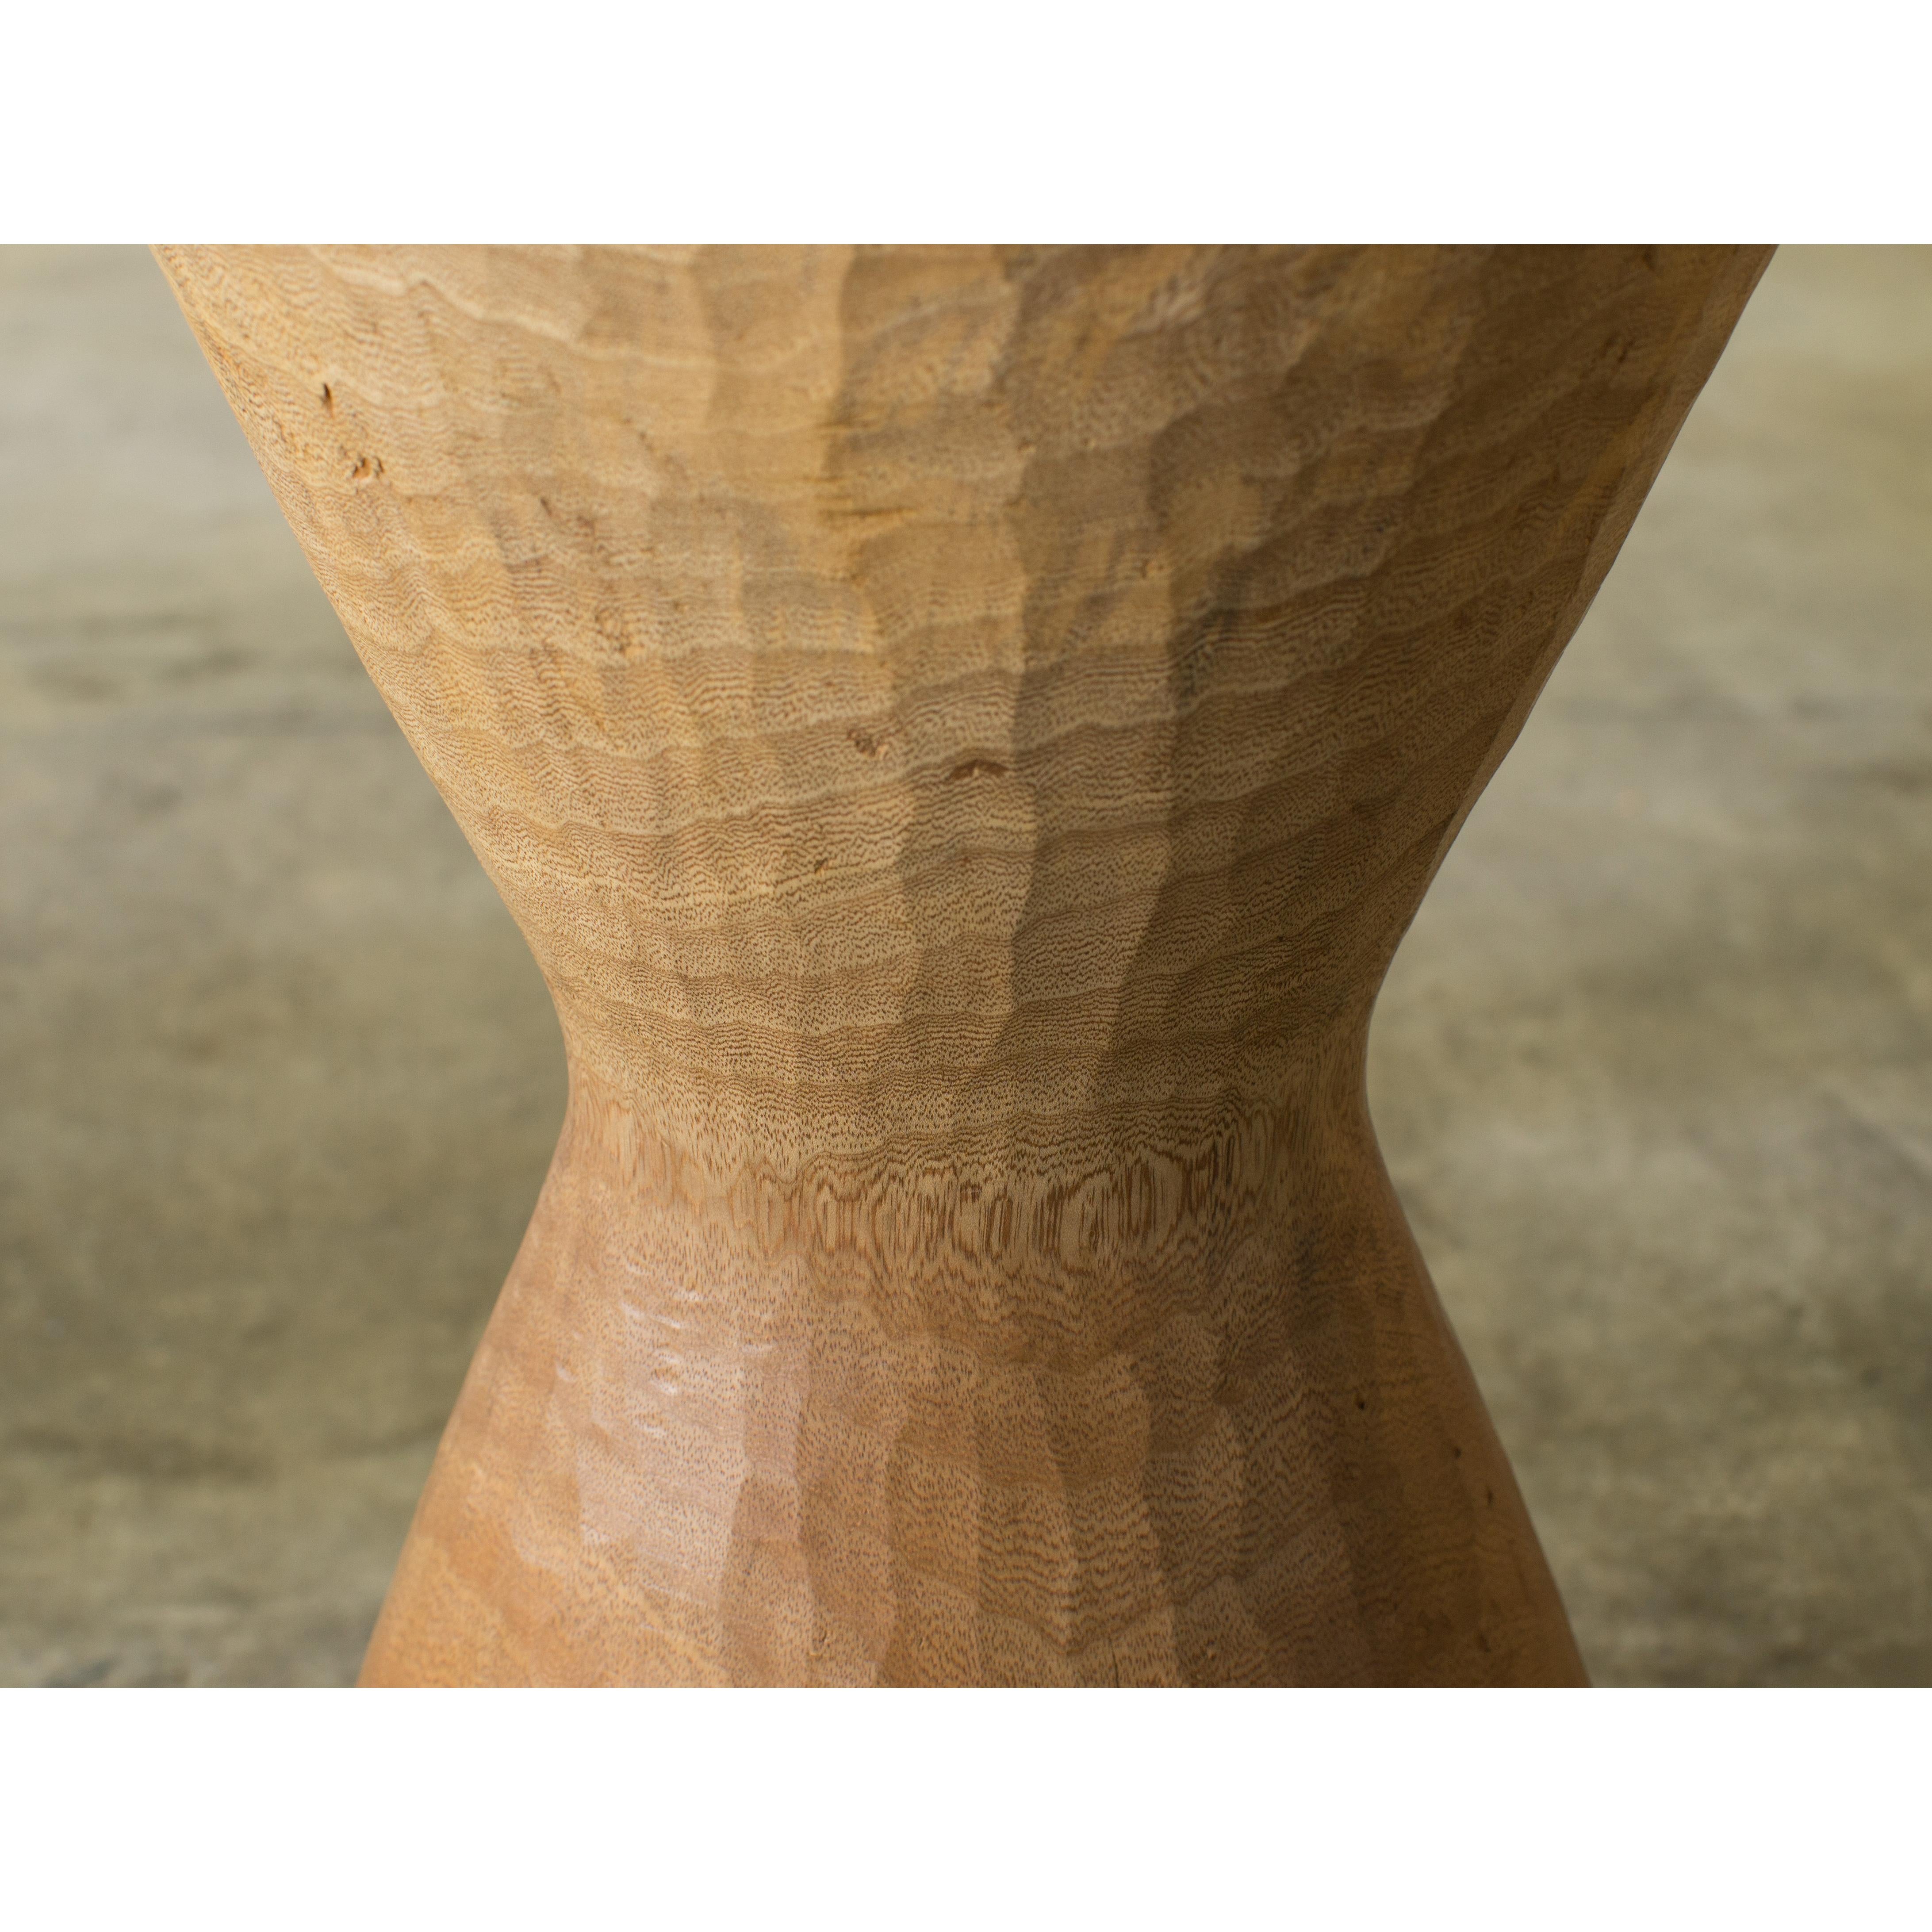 Hand-Carved Hiroyuki Nishimura and Zogei Furniture Sculptural Stool17 Tribal Glamping For Sale